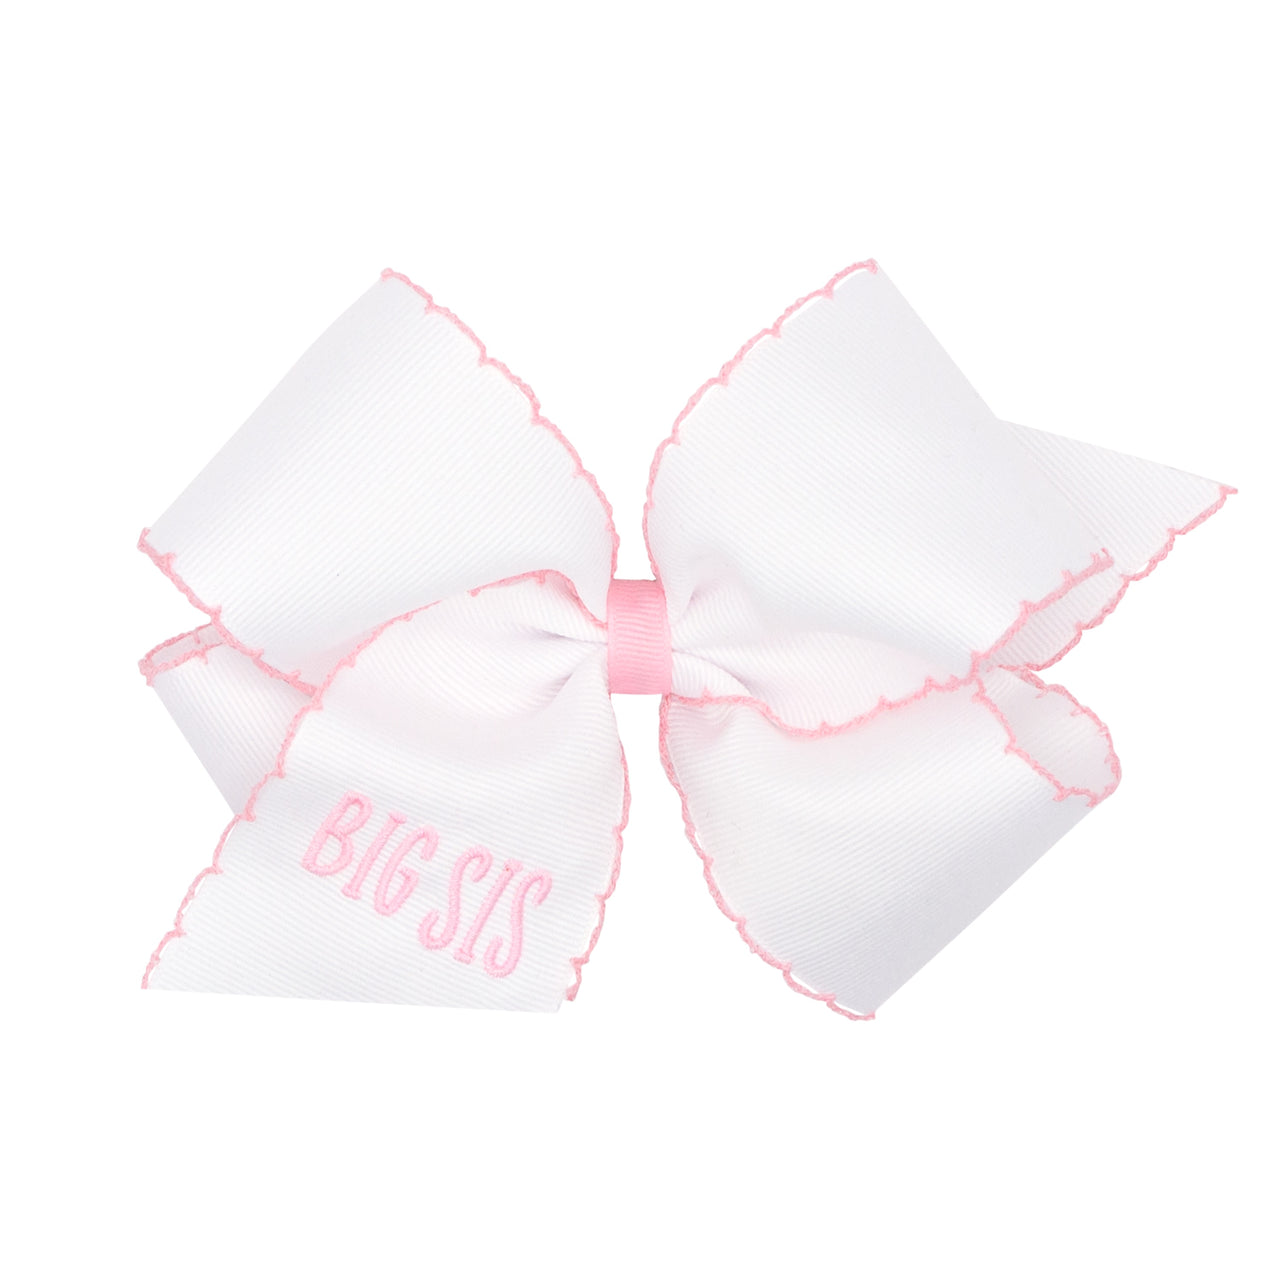 Wee Ones "Big Sis" Embroidered Grosgrain Bows